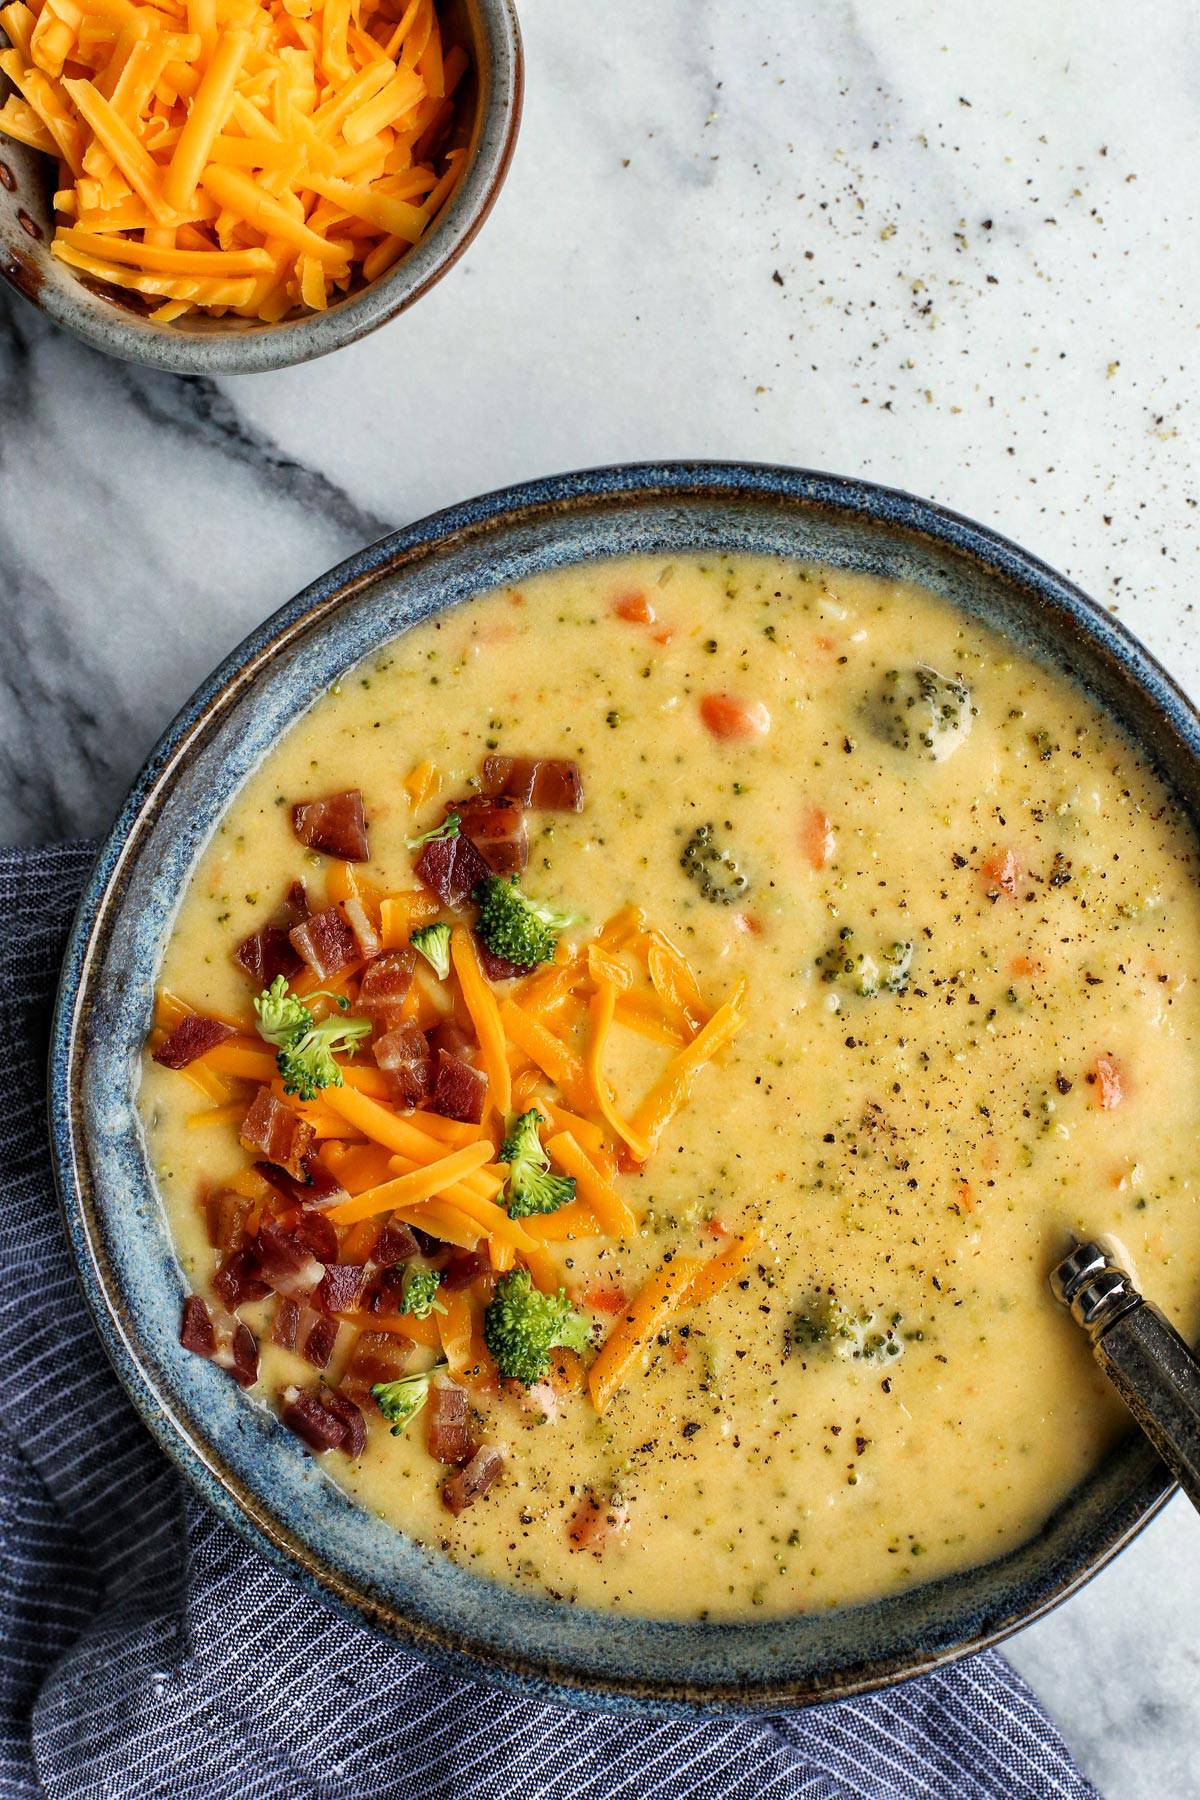 Broccoli Cheddar Soup Loaded with Vegetables